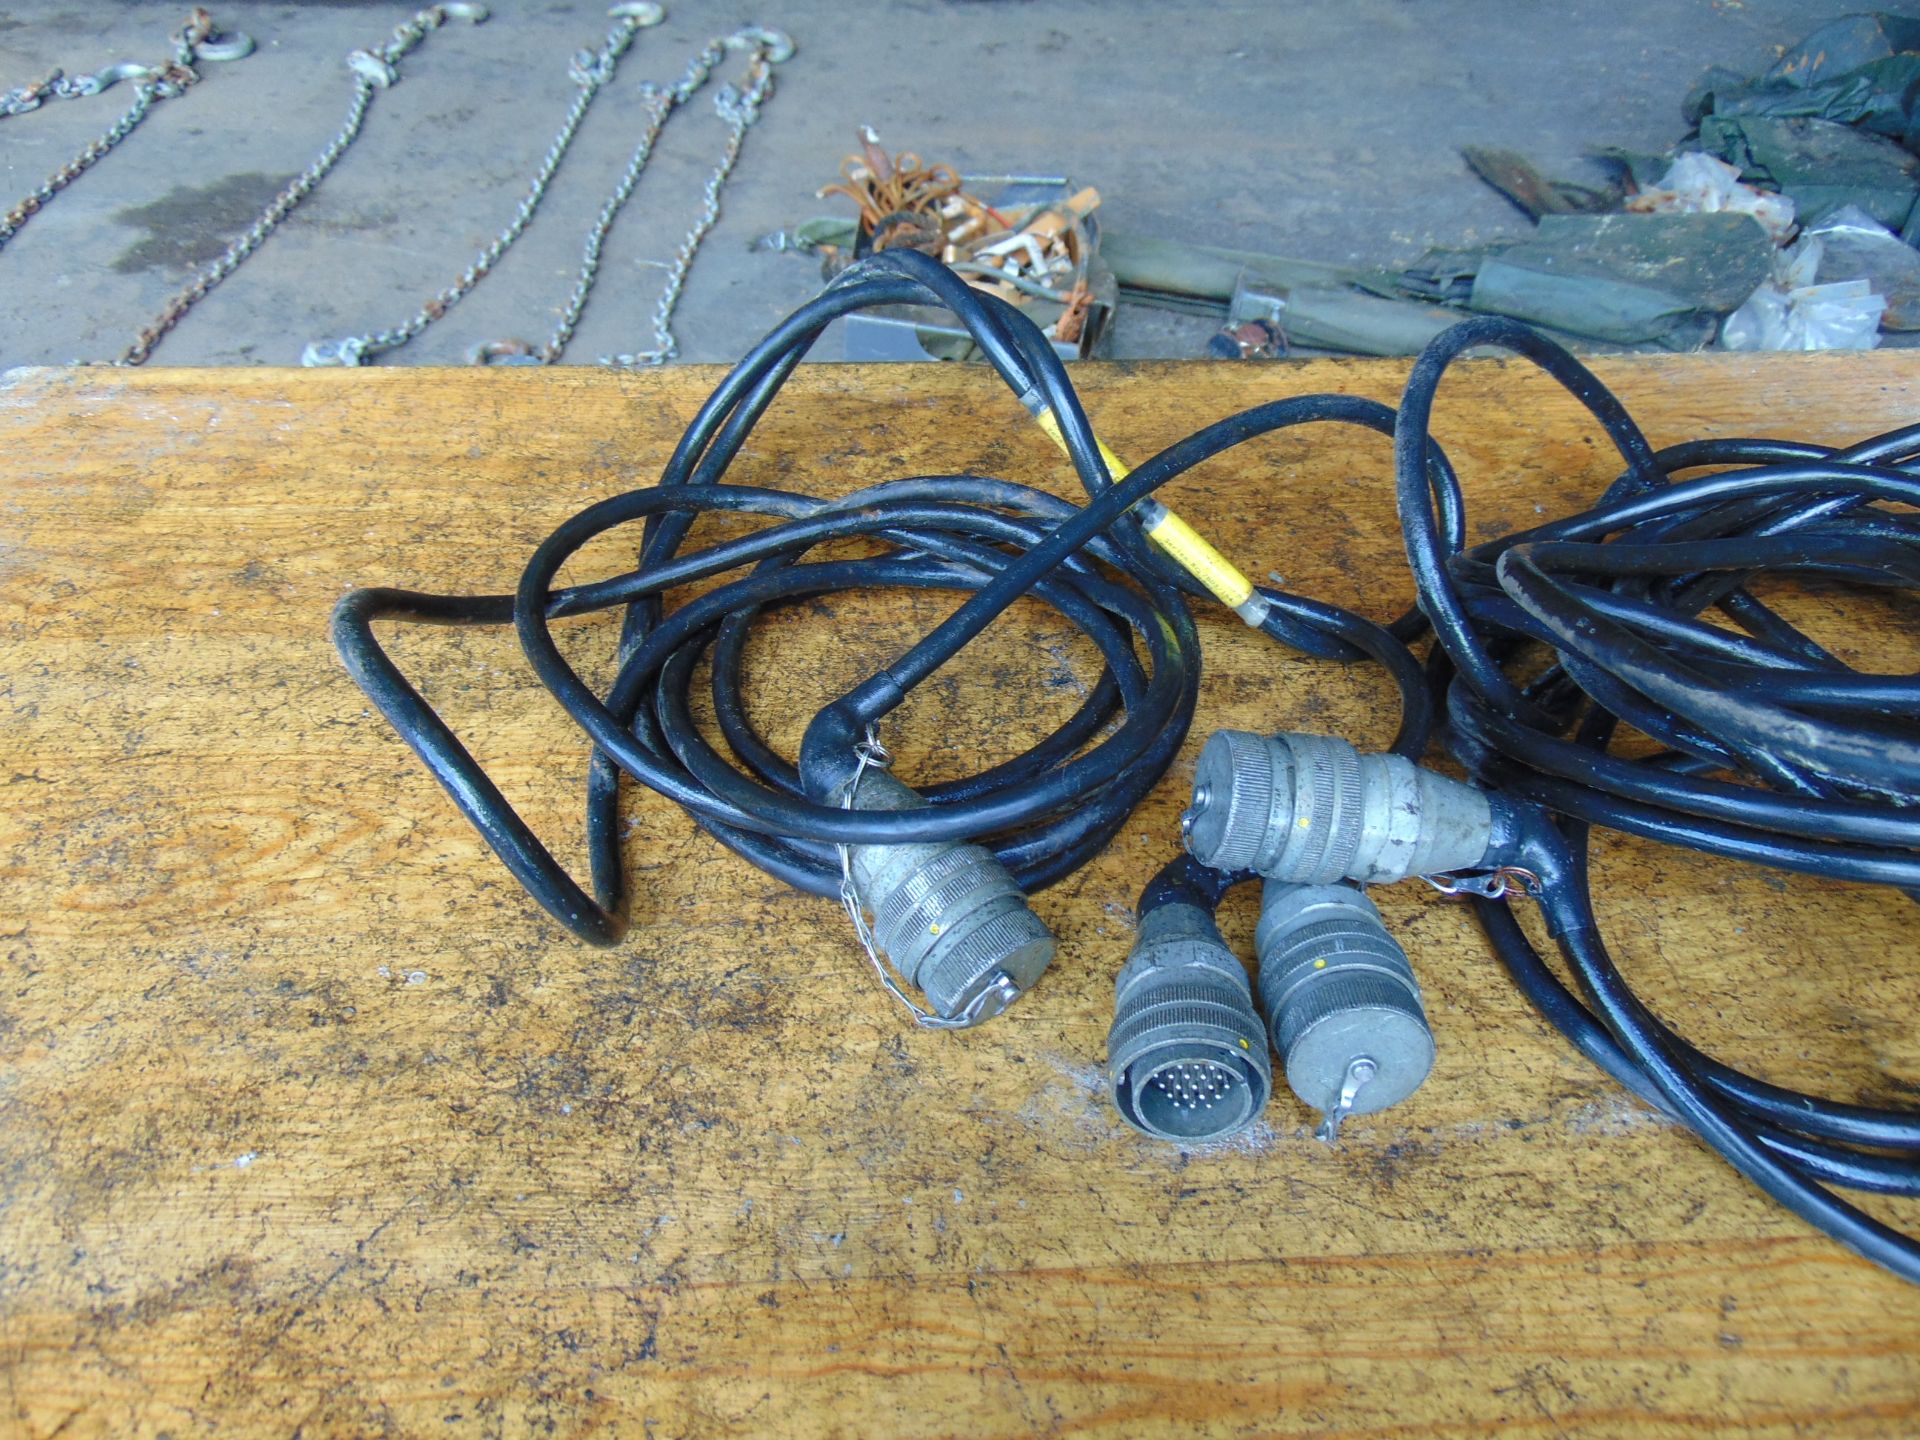 2 x Vehicle Power Connector Cable - Image 4 of 6